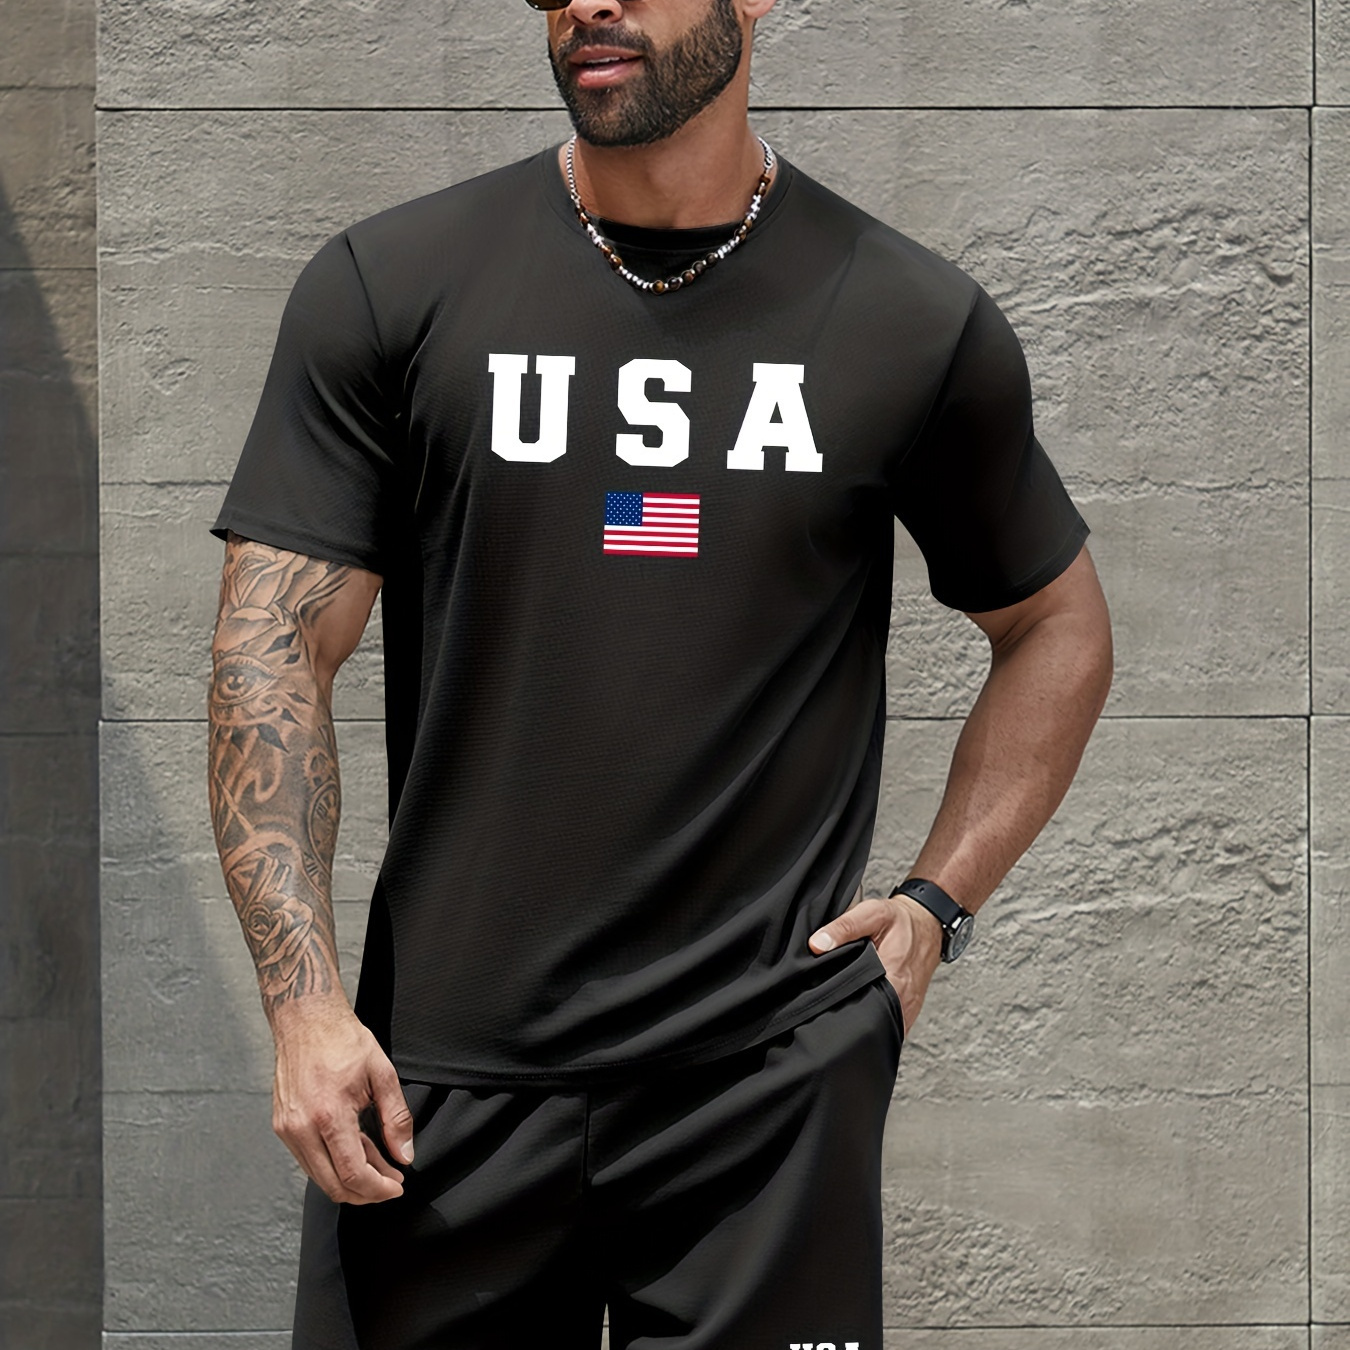 

Usa Flag Print Men's 2 Piece Set, Short Sleeve T-shirt & Drawstring Shorts For Summer, Casual Comfy Versatile Outfits For Outdoor Sports